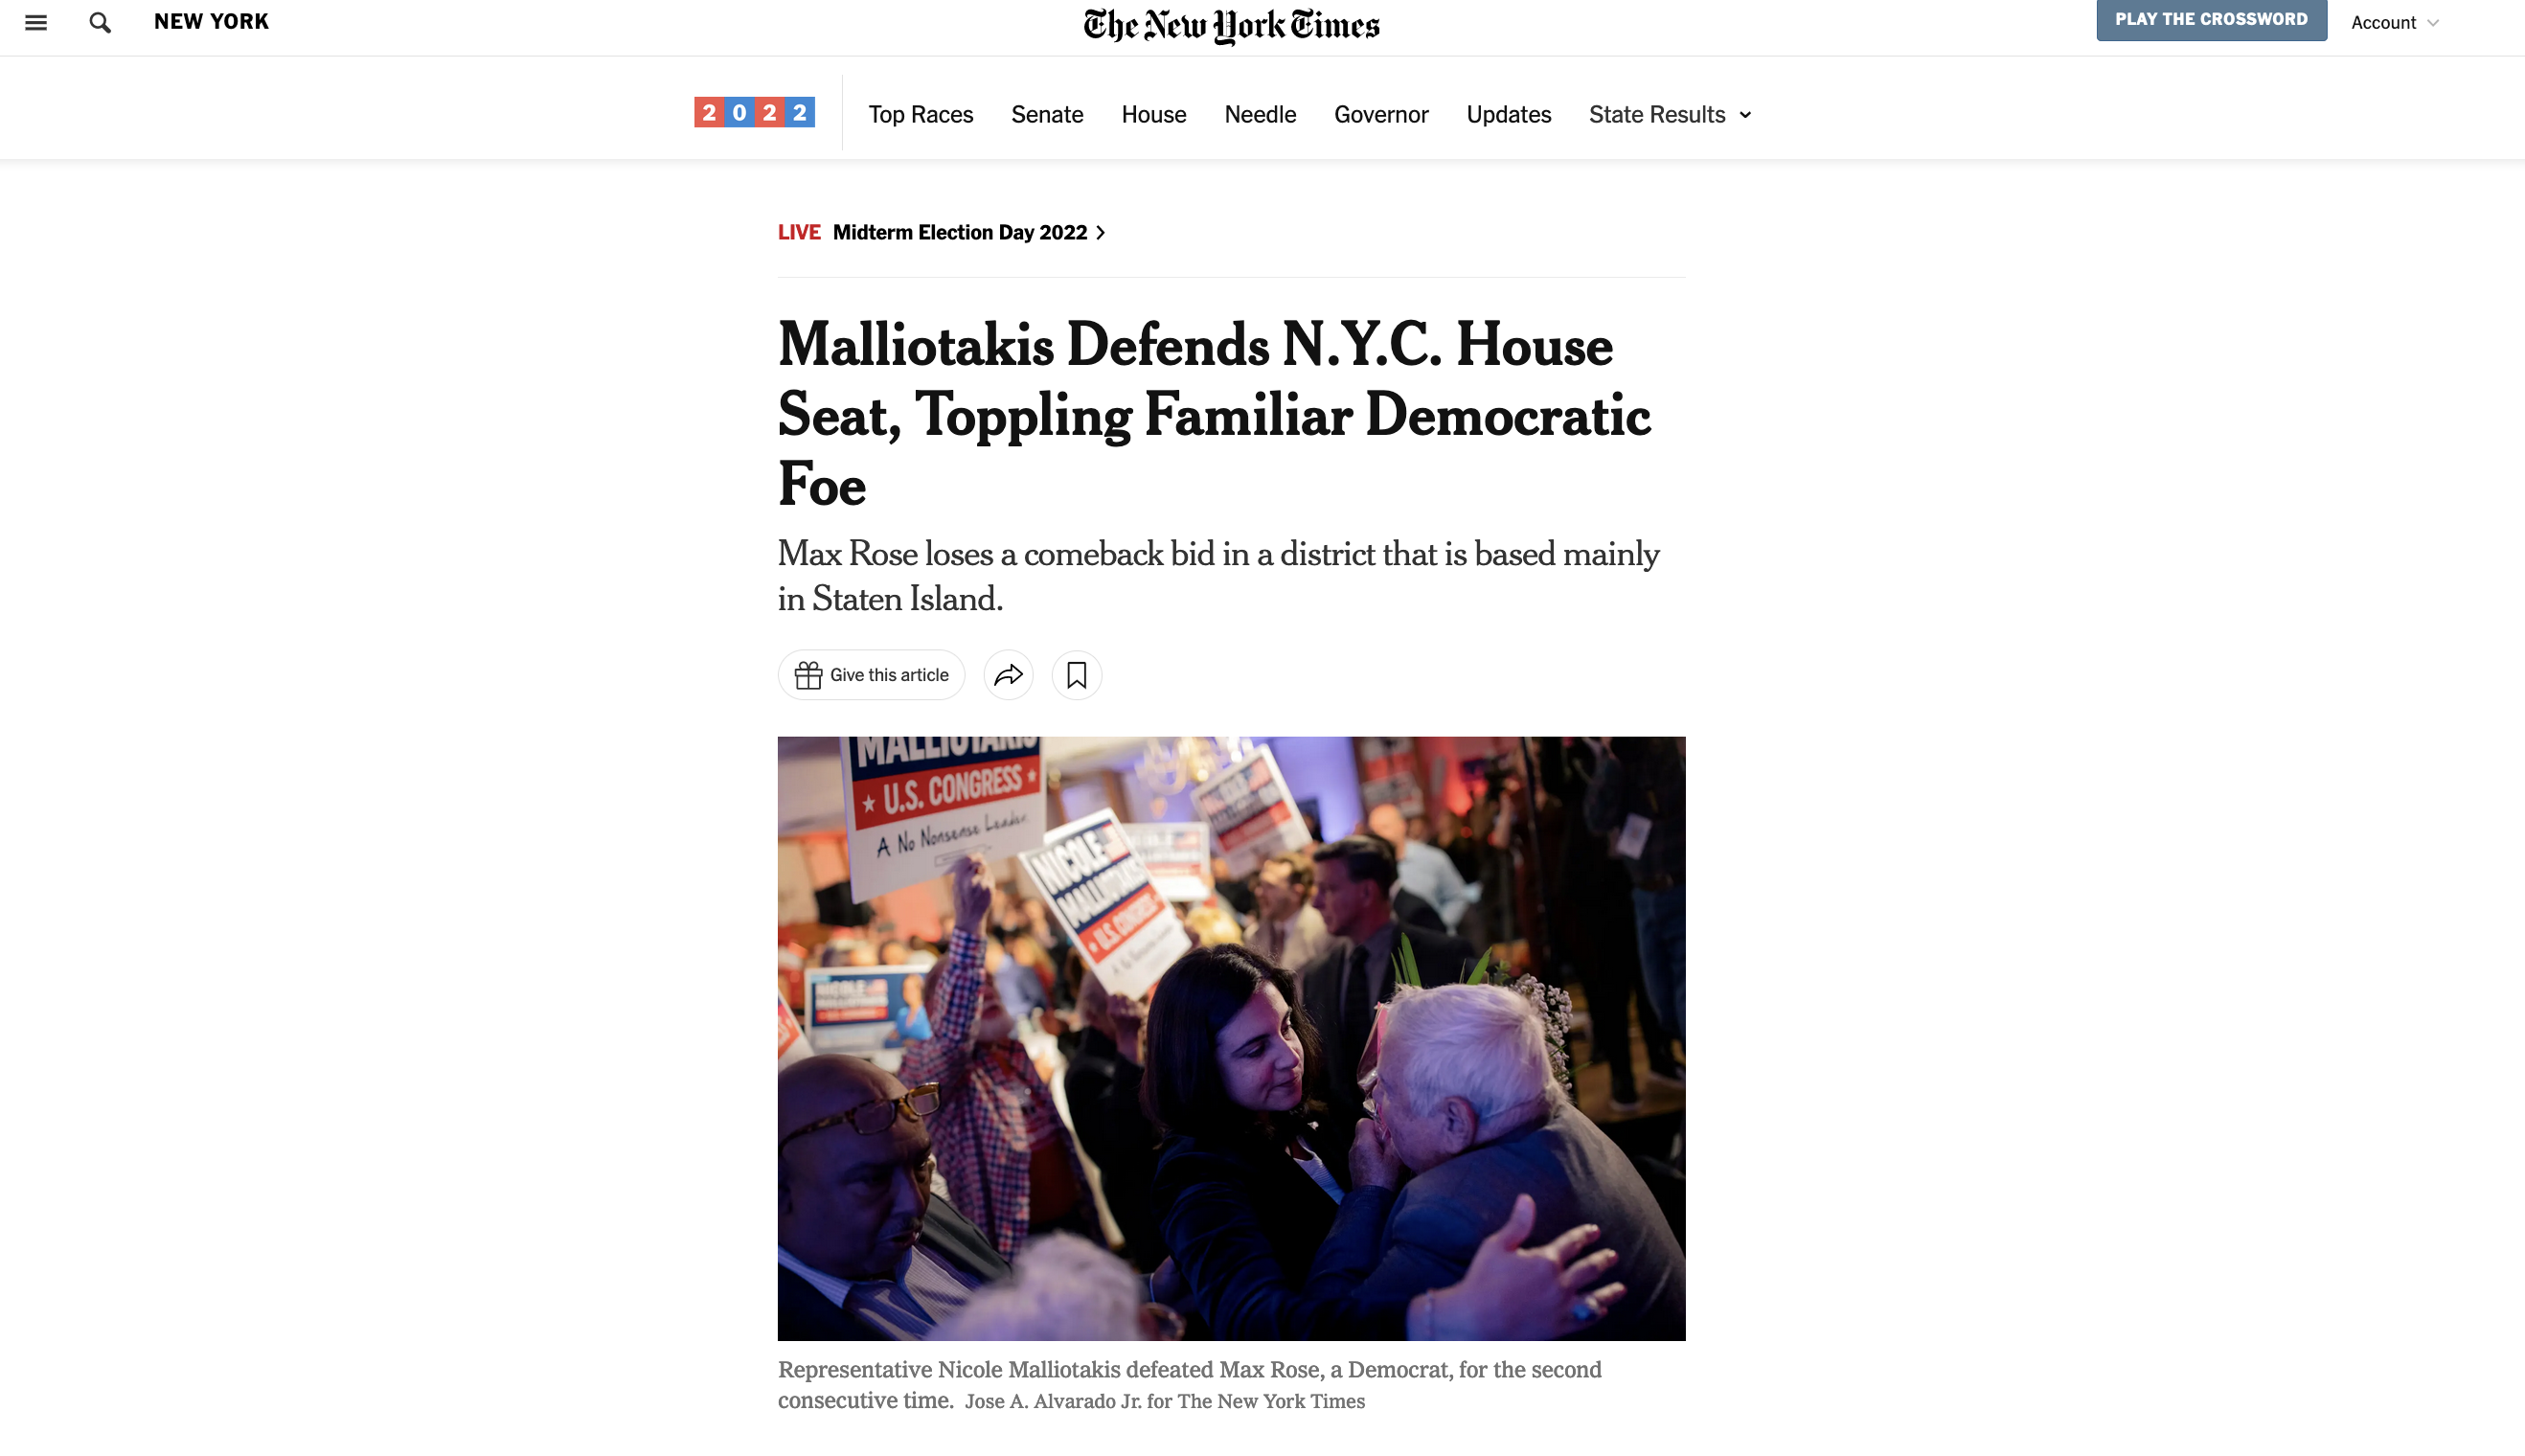 for The New York Times: Malliotakis Defends N.Y.C. House Seat, Toppling Familiar Democratic Foe